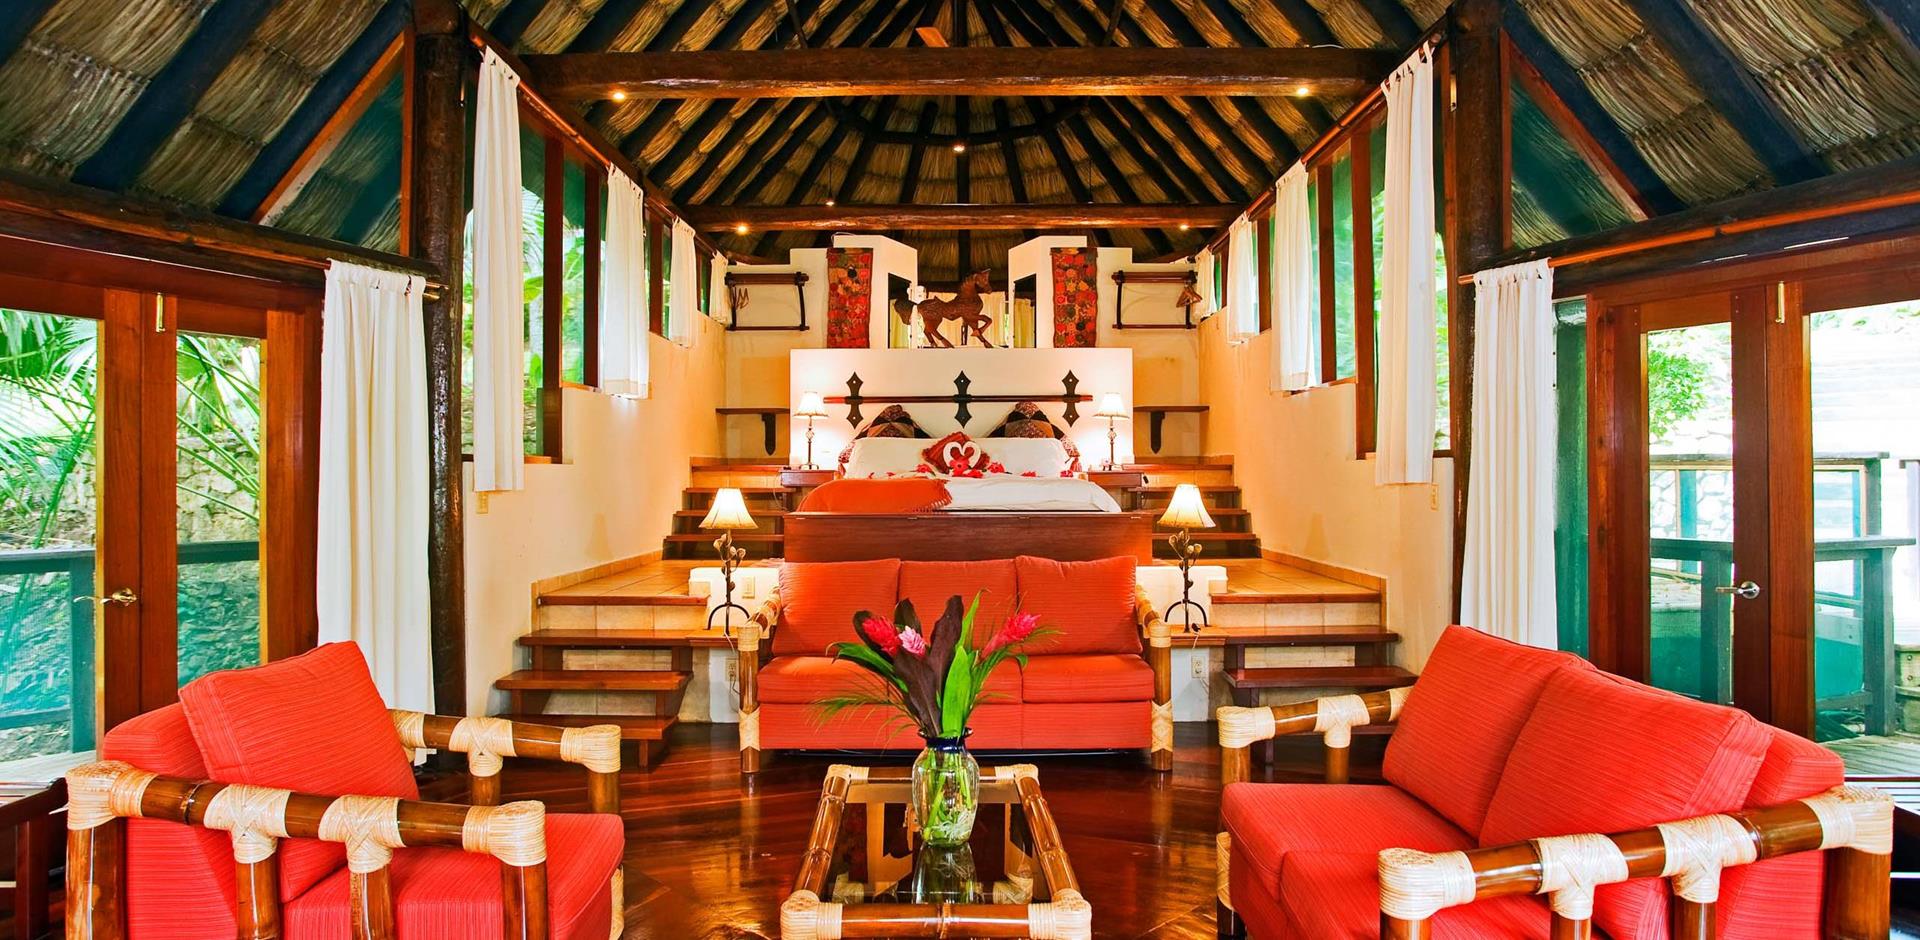 Bedroom and lounge, The Lodge at Chaa Creek, Belize, Central America